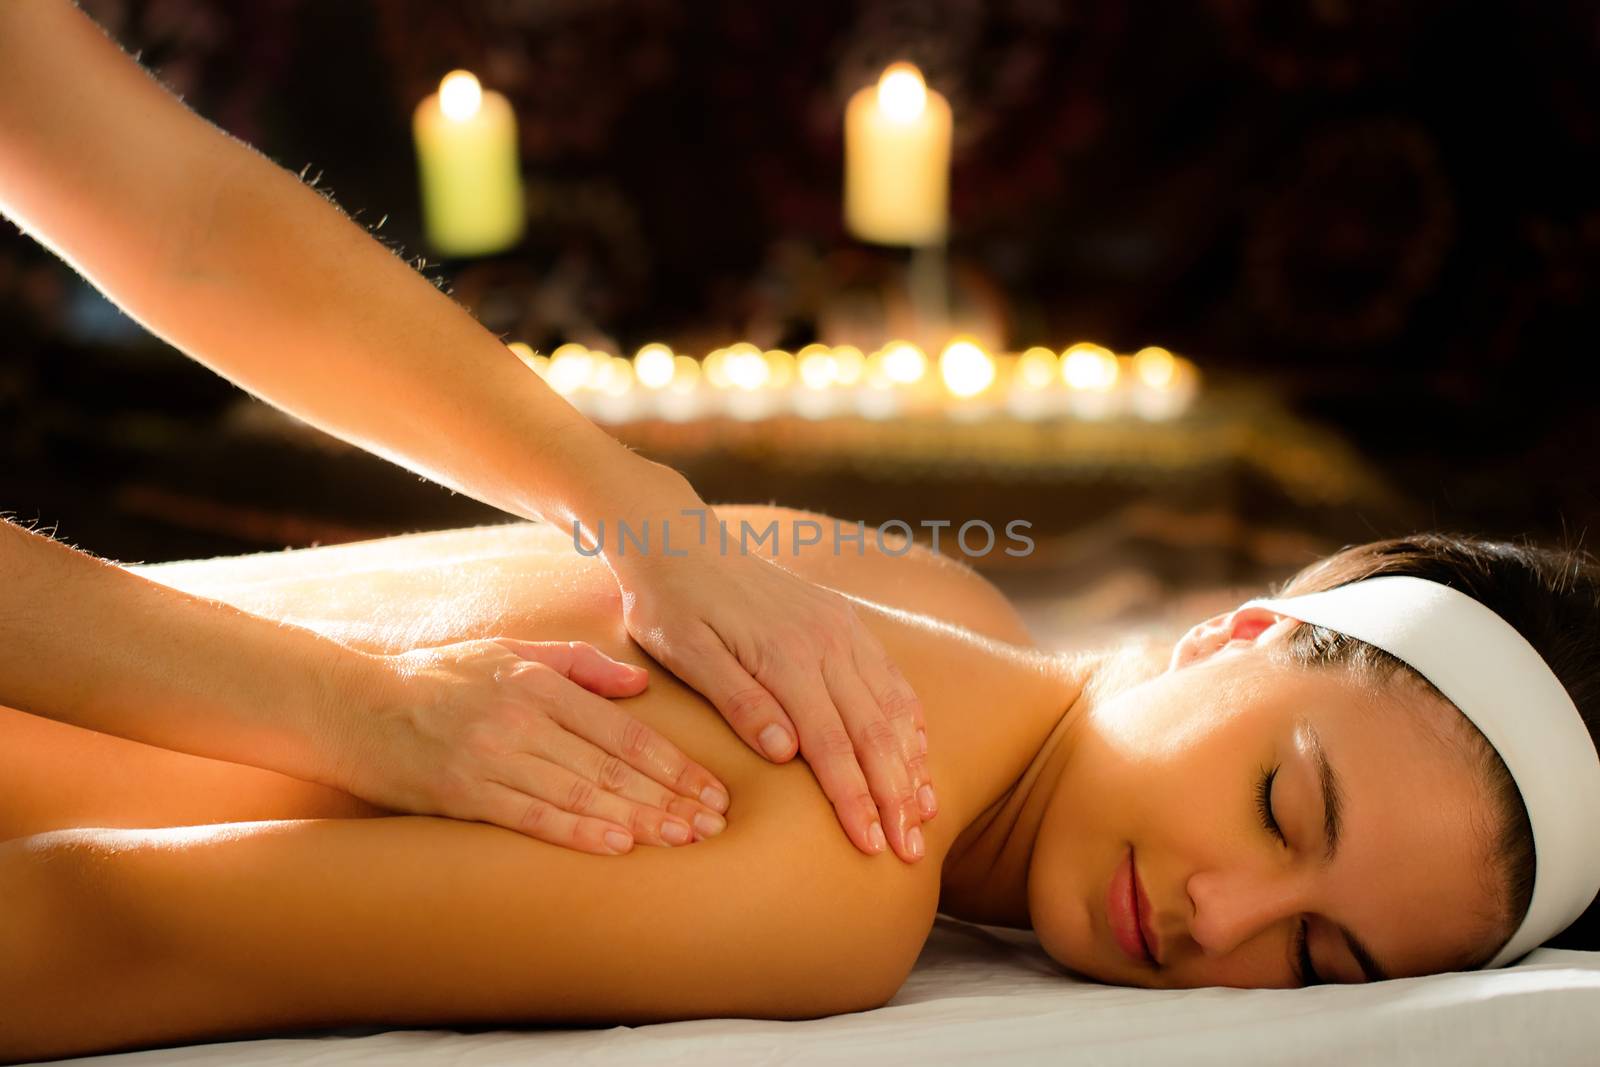 Close up of therapist massaging female spine in spa. Low key atmosphere with out of focus candles glowing in background.